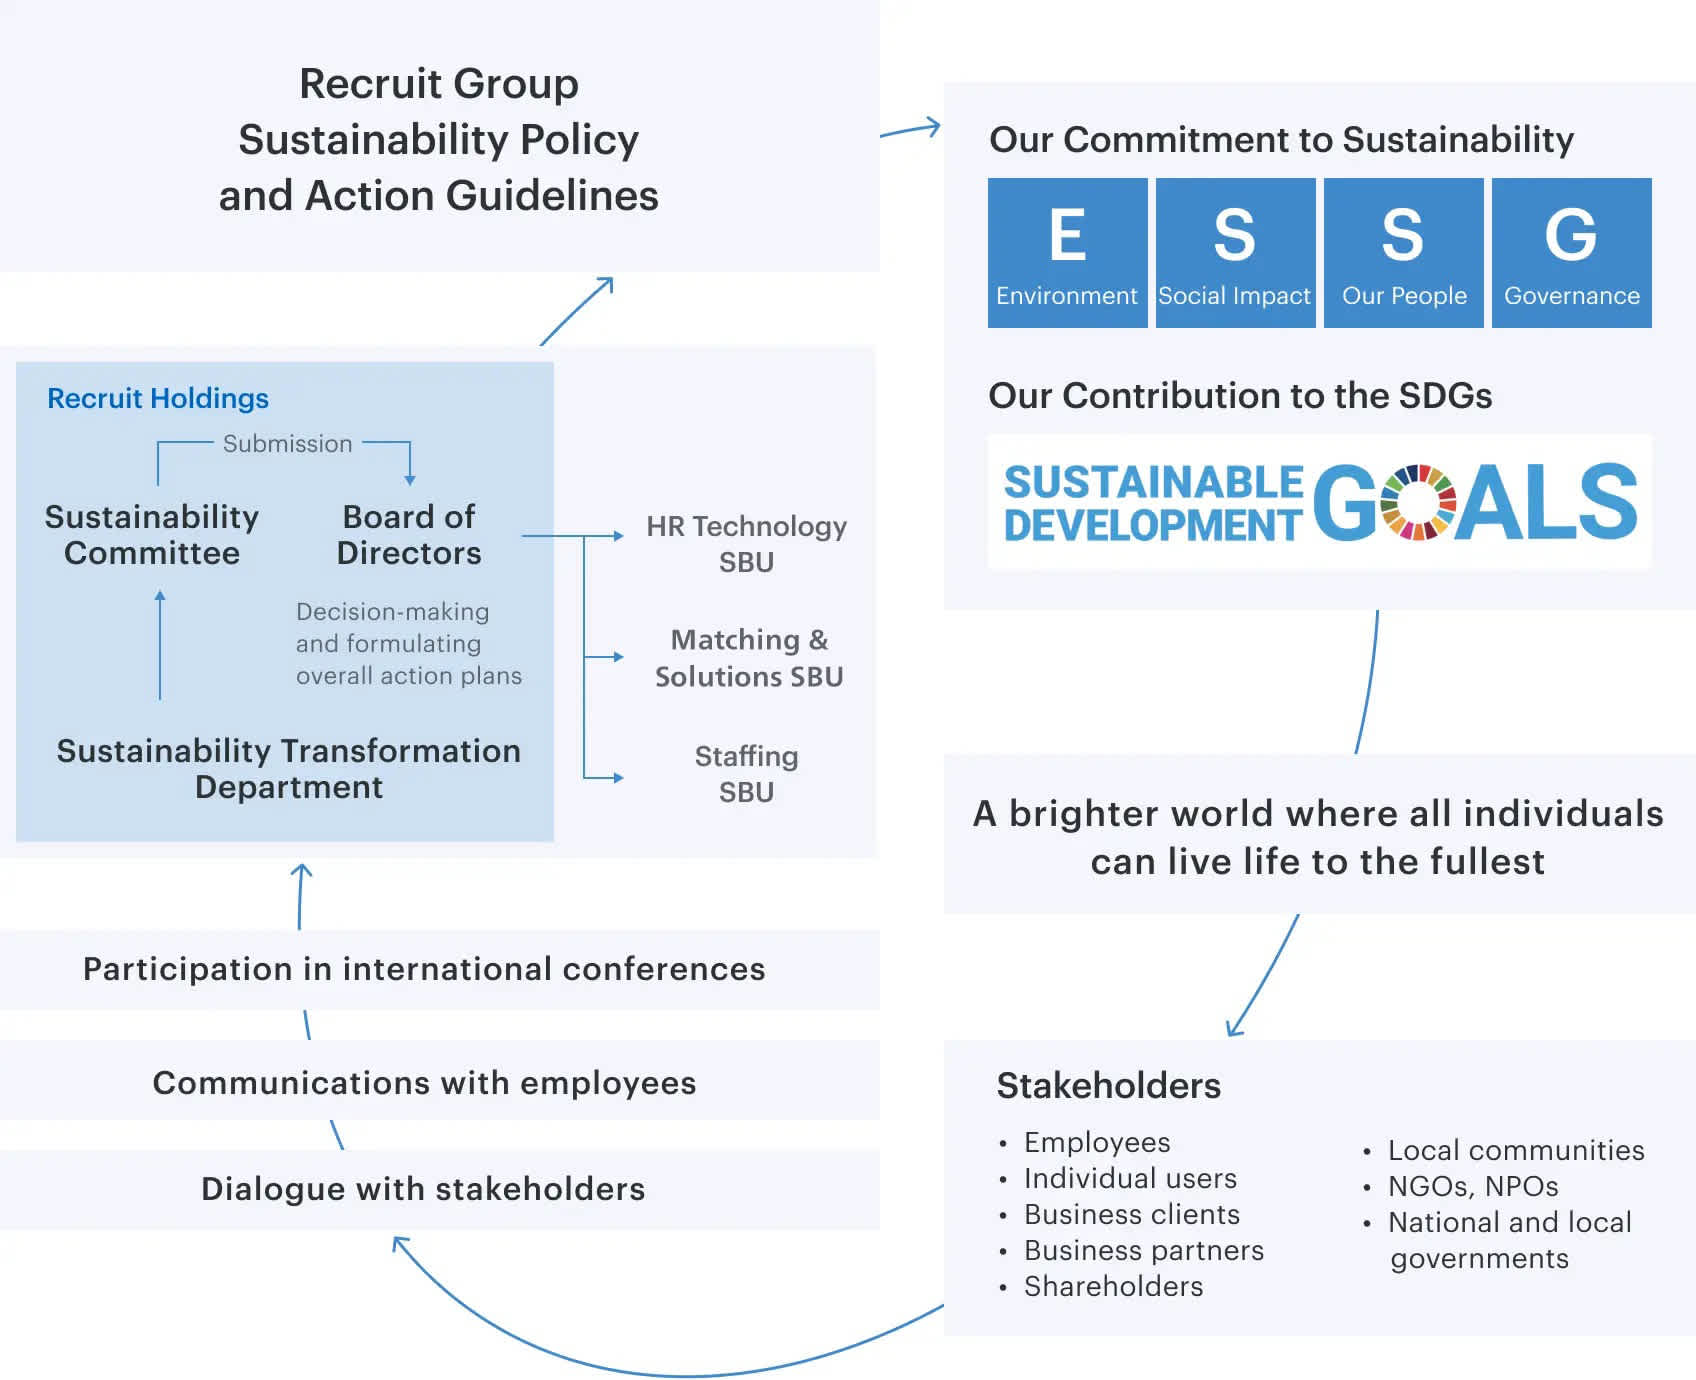 A "Sustainability Orbit" diagram showing the cycle of initiatives to promote sustainability.